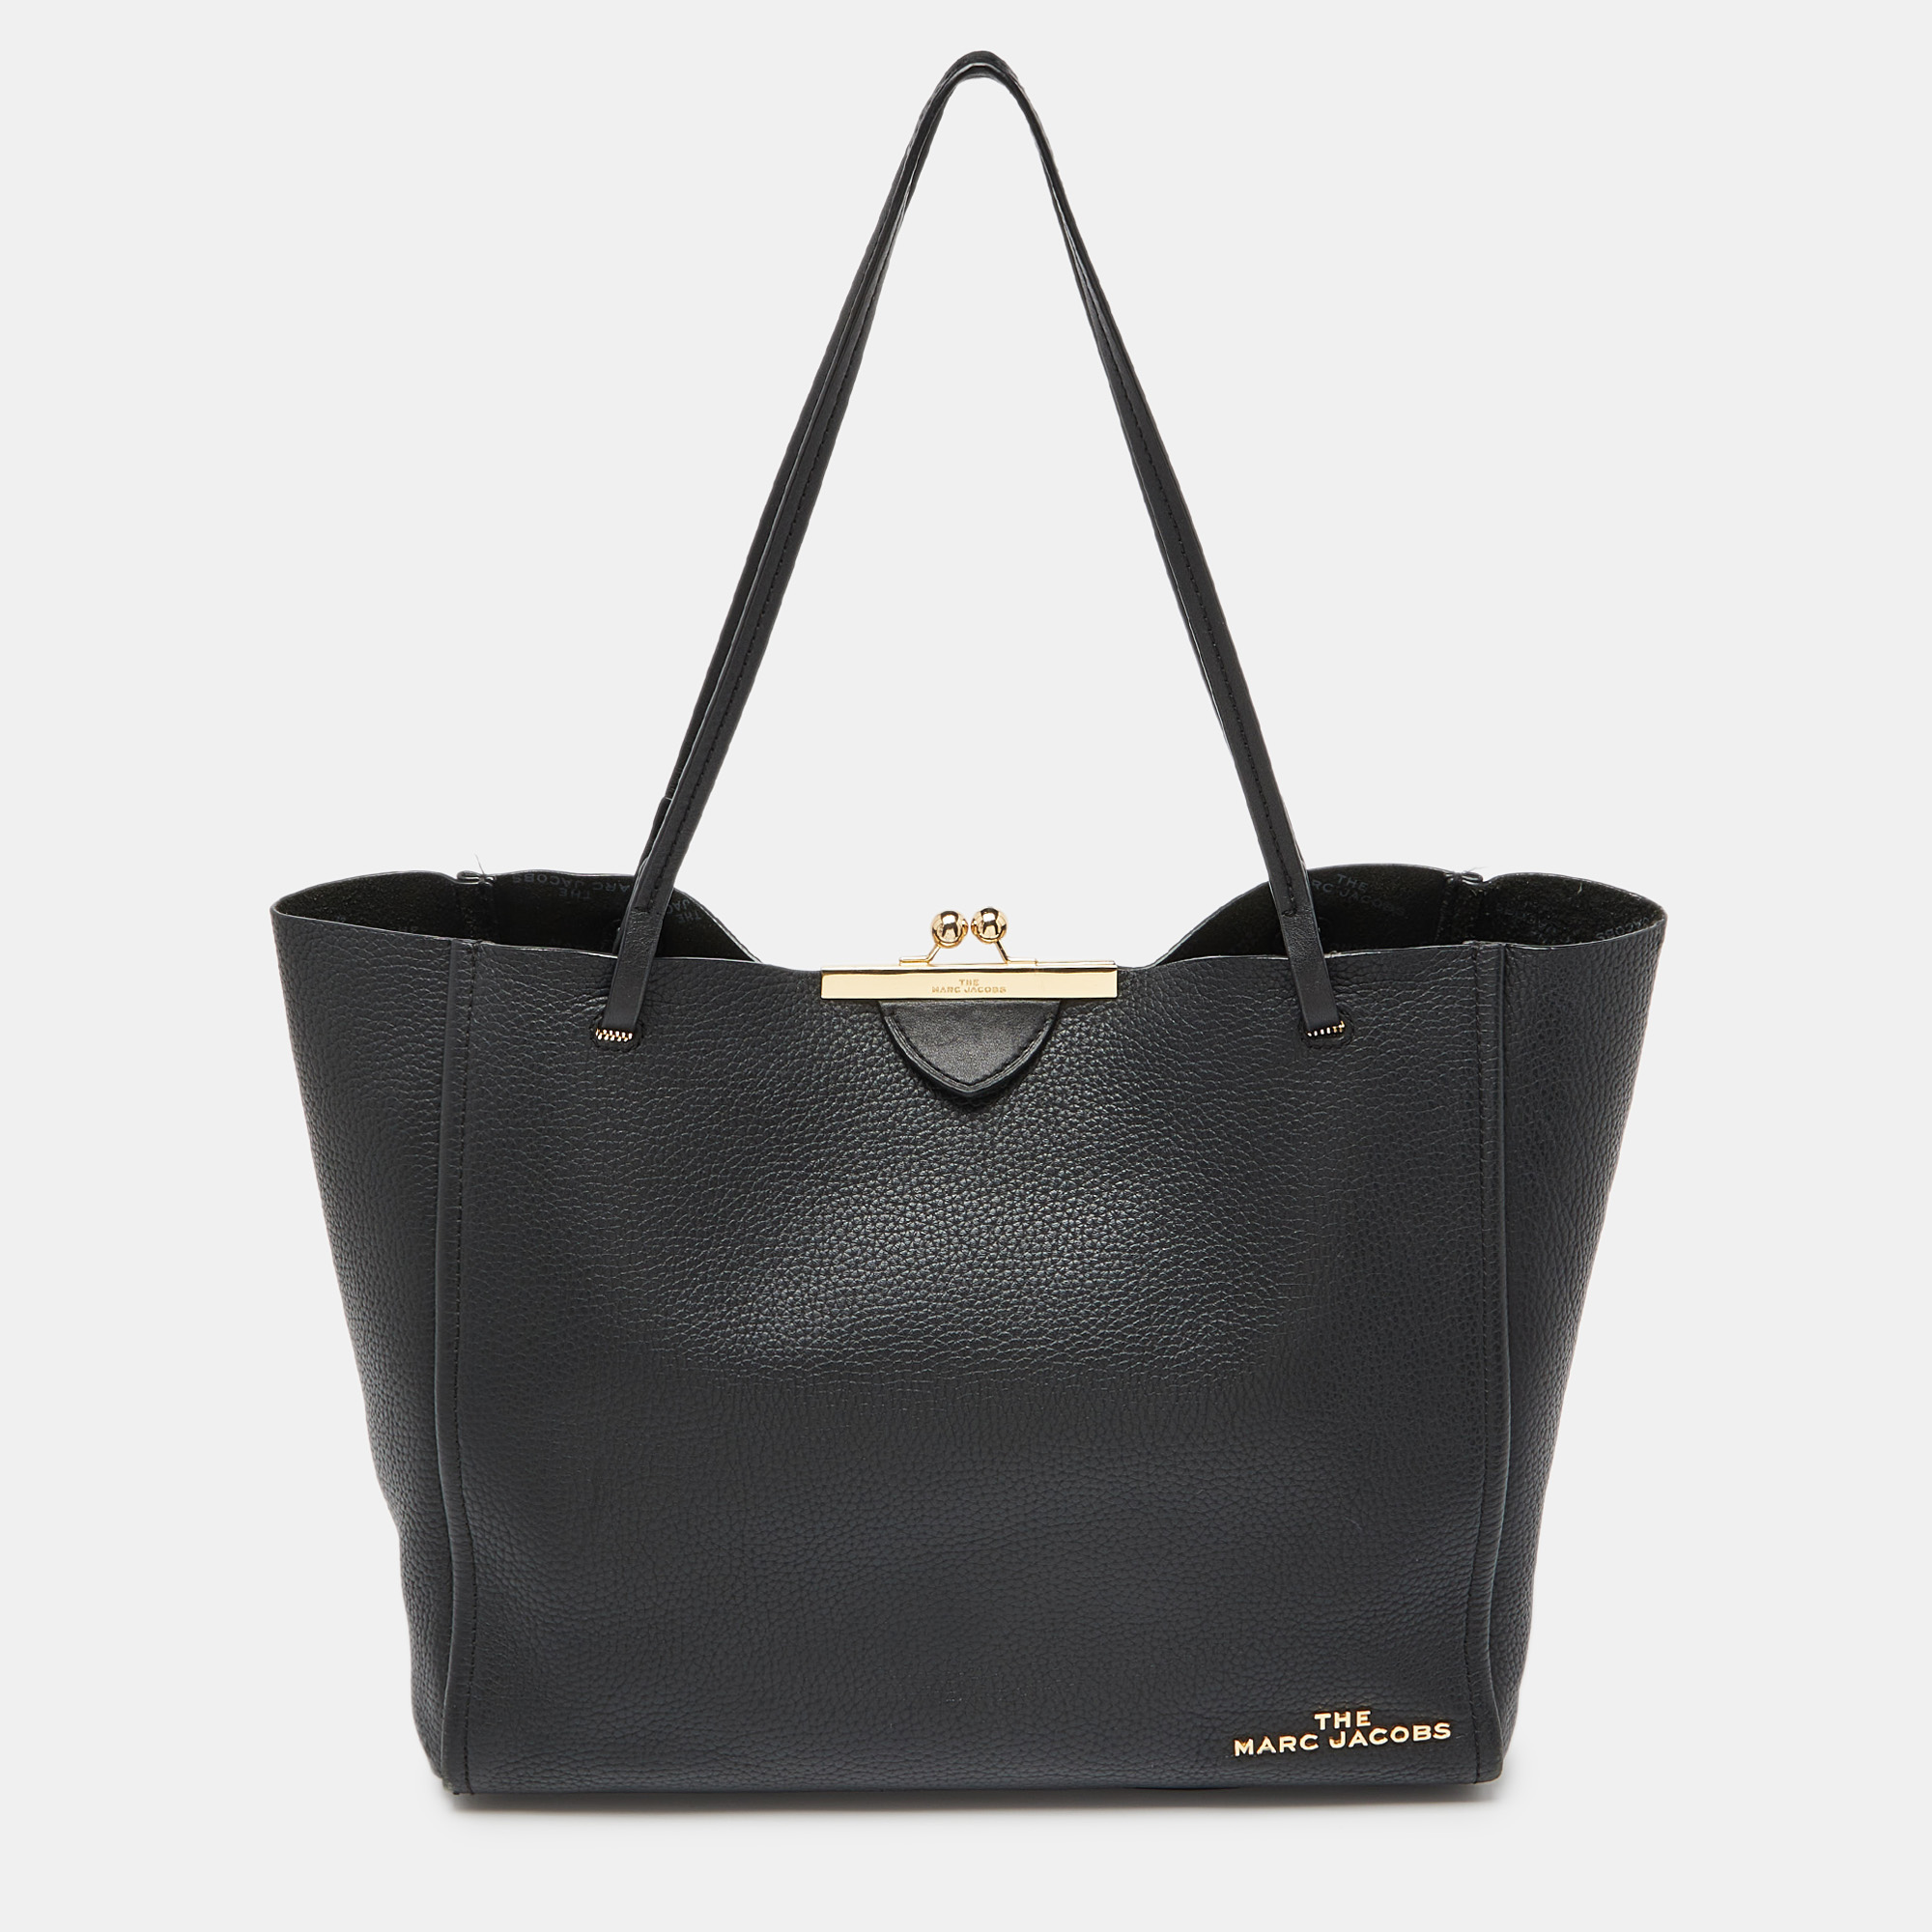 

Marc Jacobs Black Leather The Kiss Shopper Tote